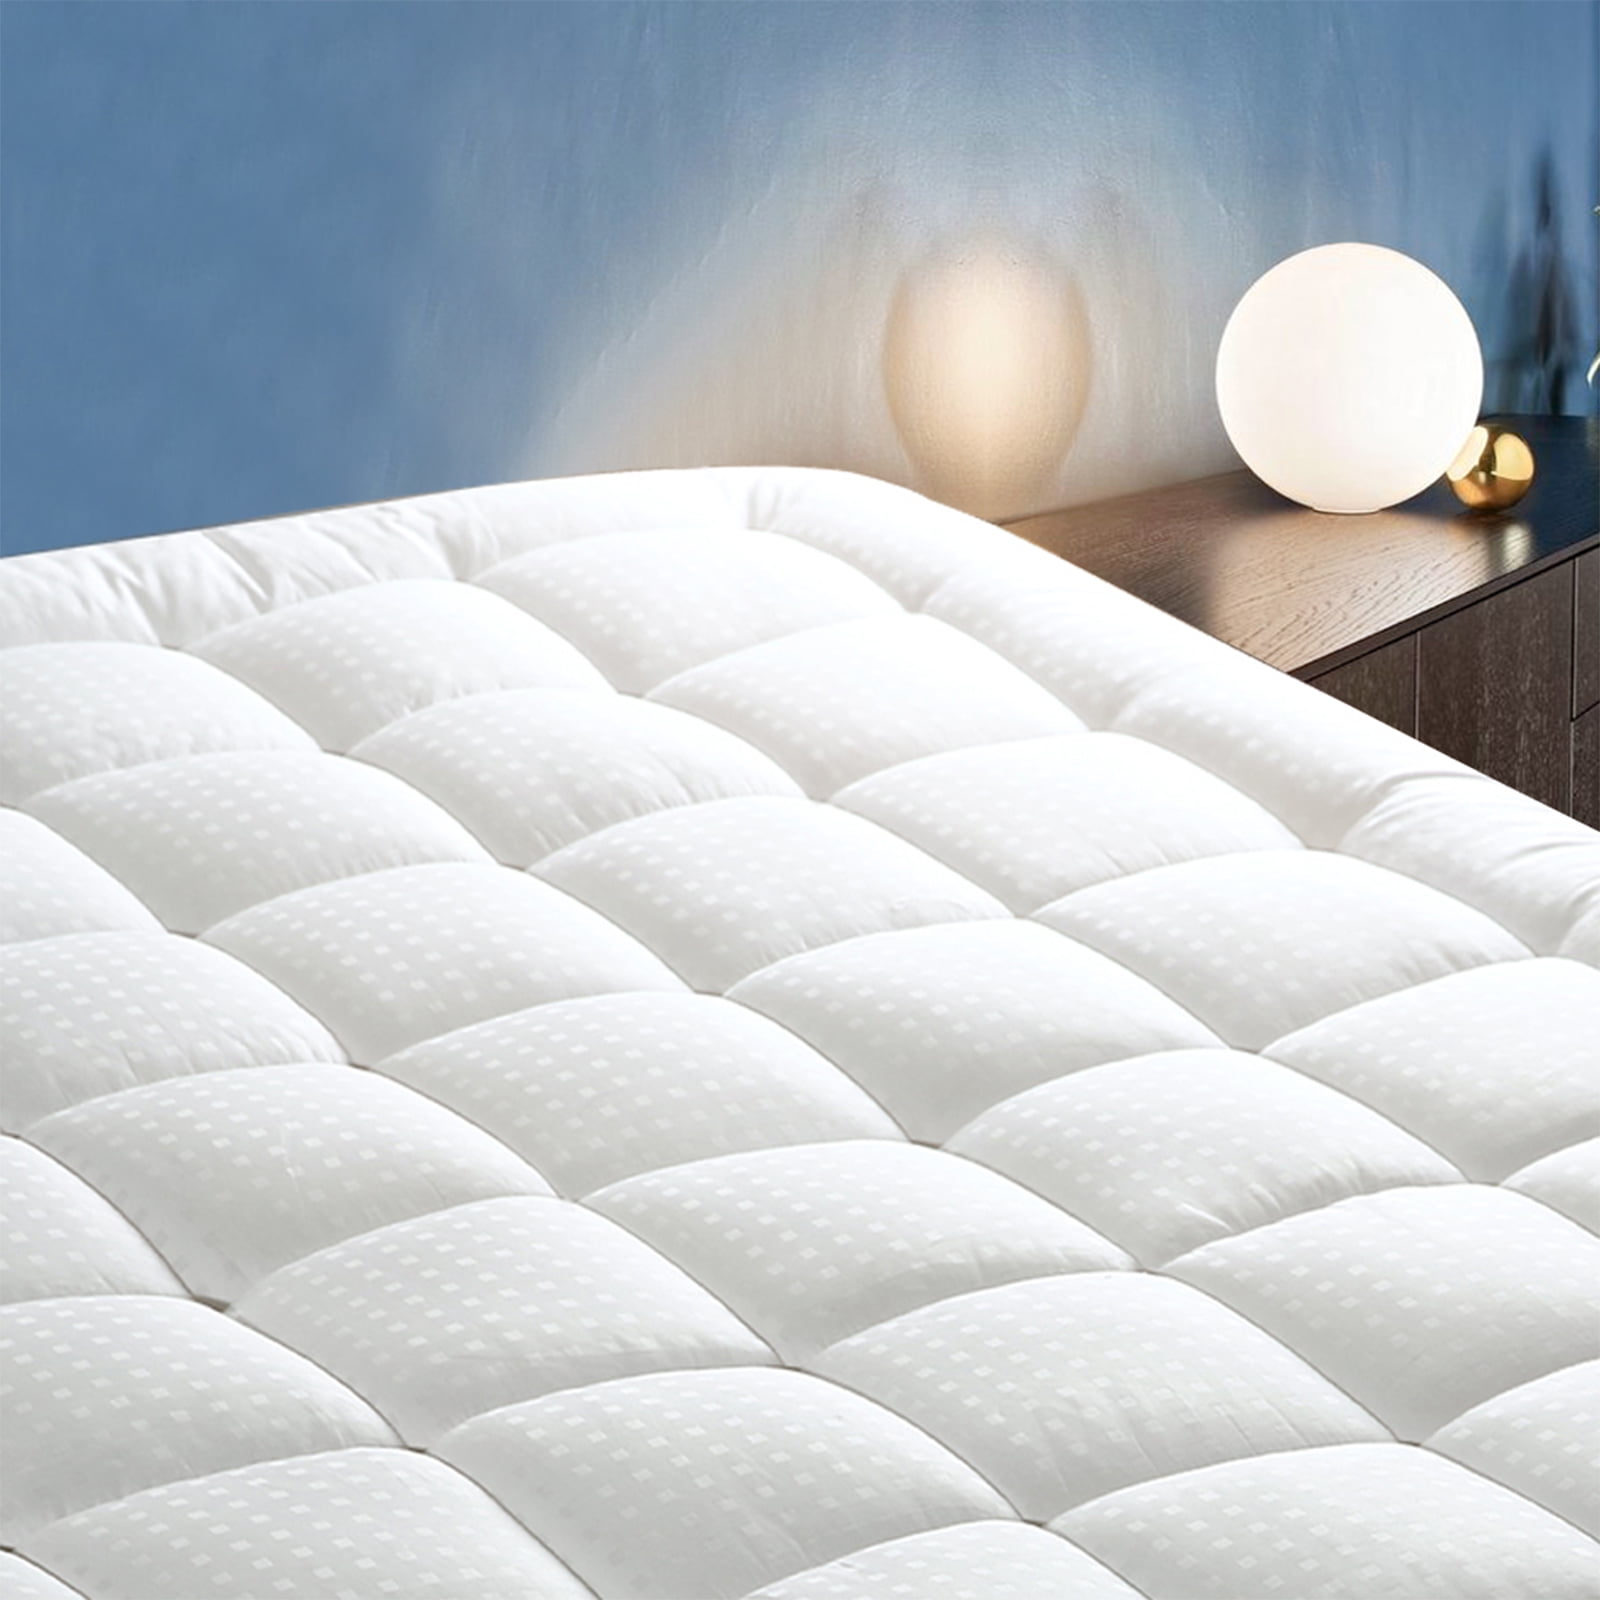 Quilted Mattress Pad Fits Any Mattress Style Freshness Protection Queen & King 